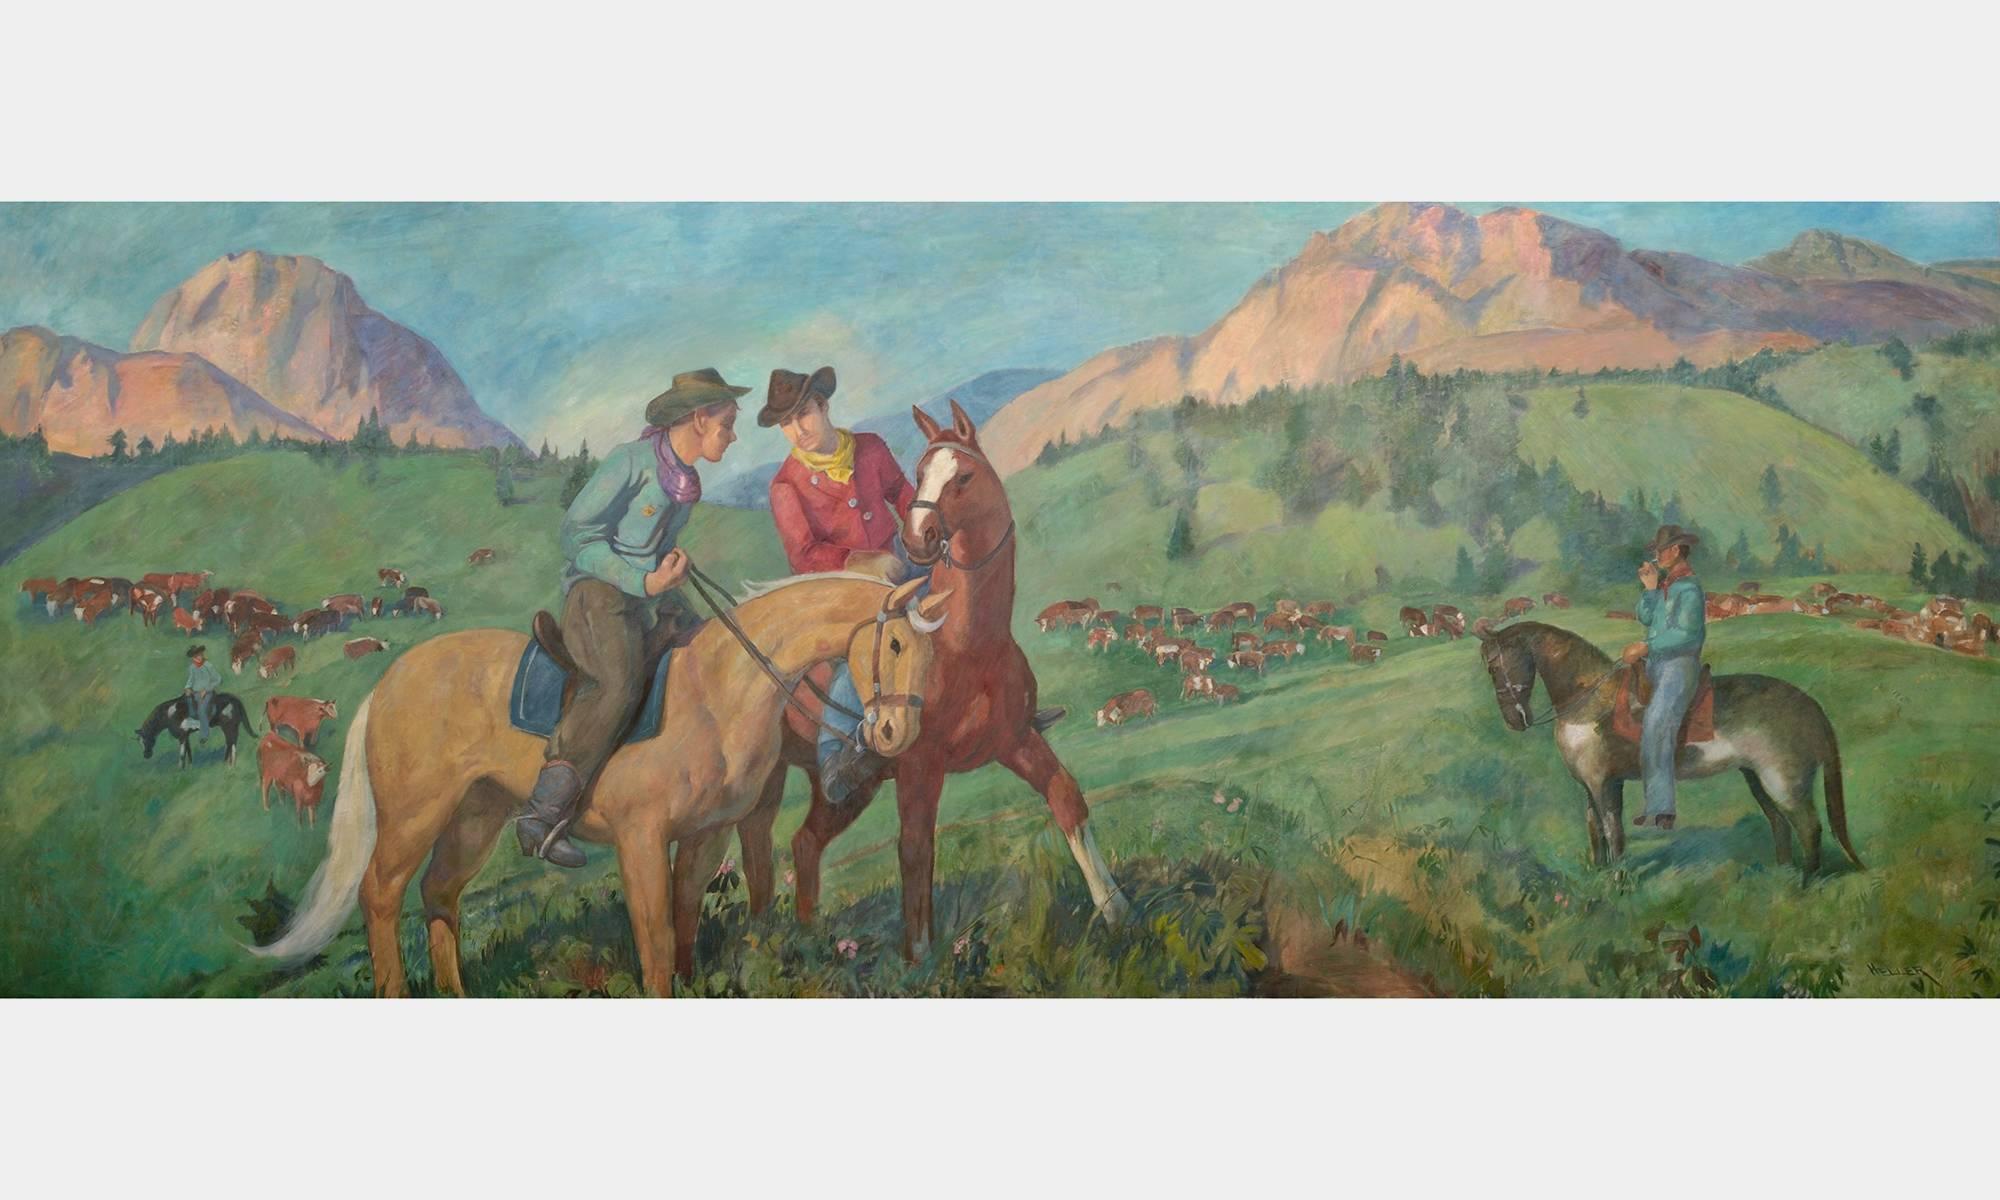 Large-scale oil on canvas painting depicting cowboys attending cattle. Six murals were made in total portraying idealized scenes of the American industry in progress. The paintings lined the walls of the Bank of St. Louis from